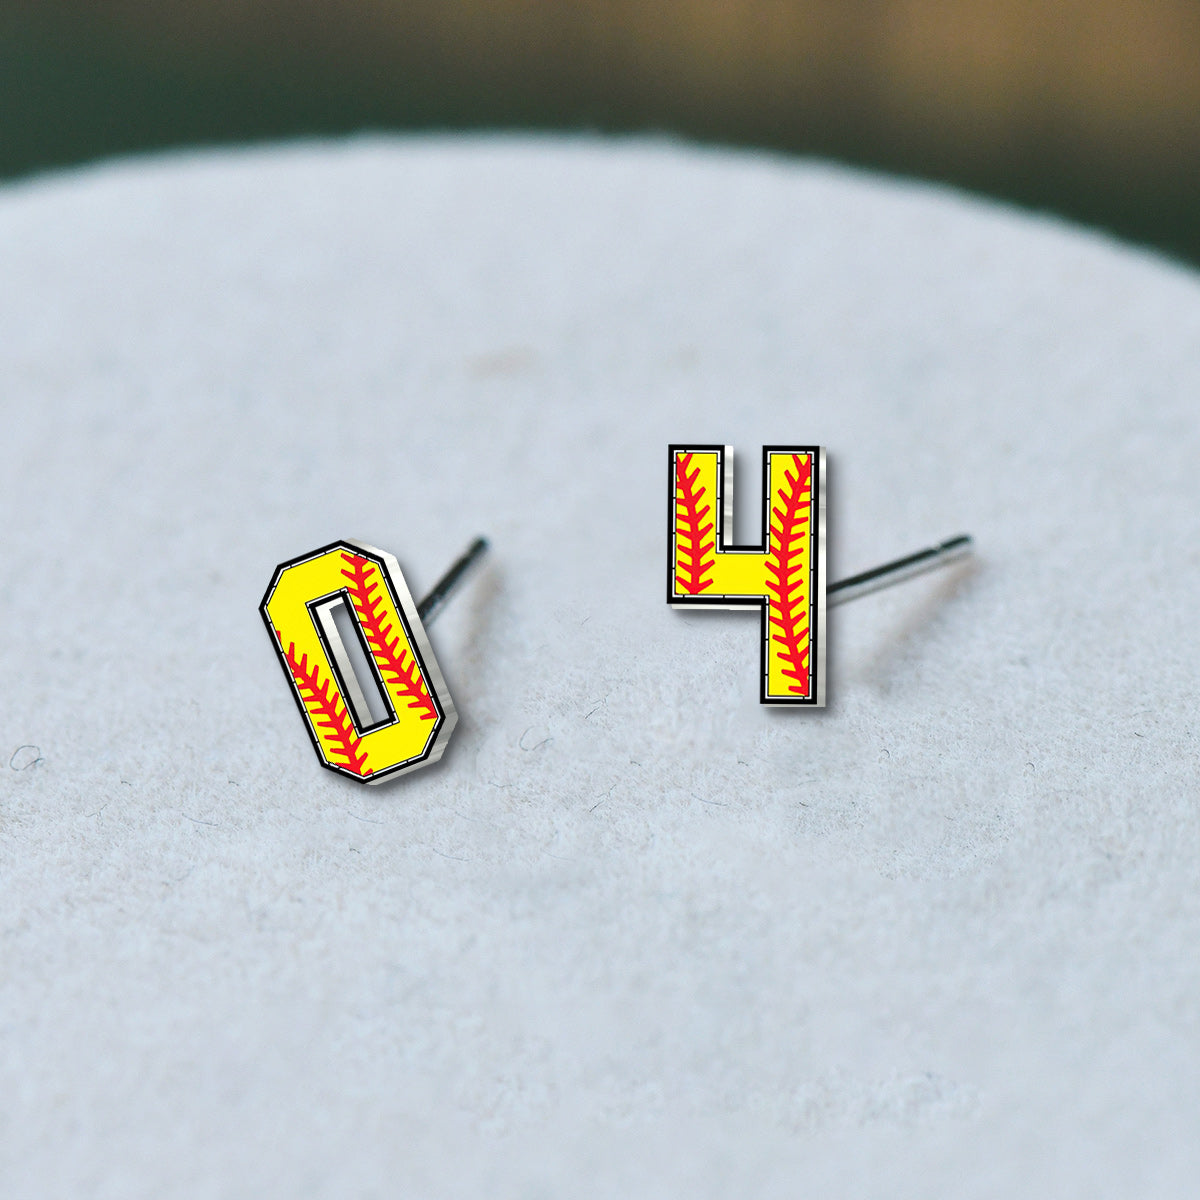 Softball Lovers Player's Number - Personalized Softball Stud Earrings